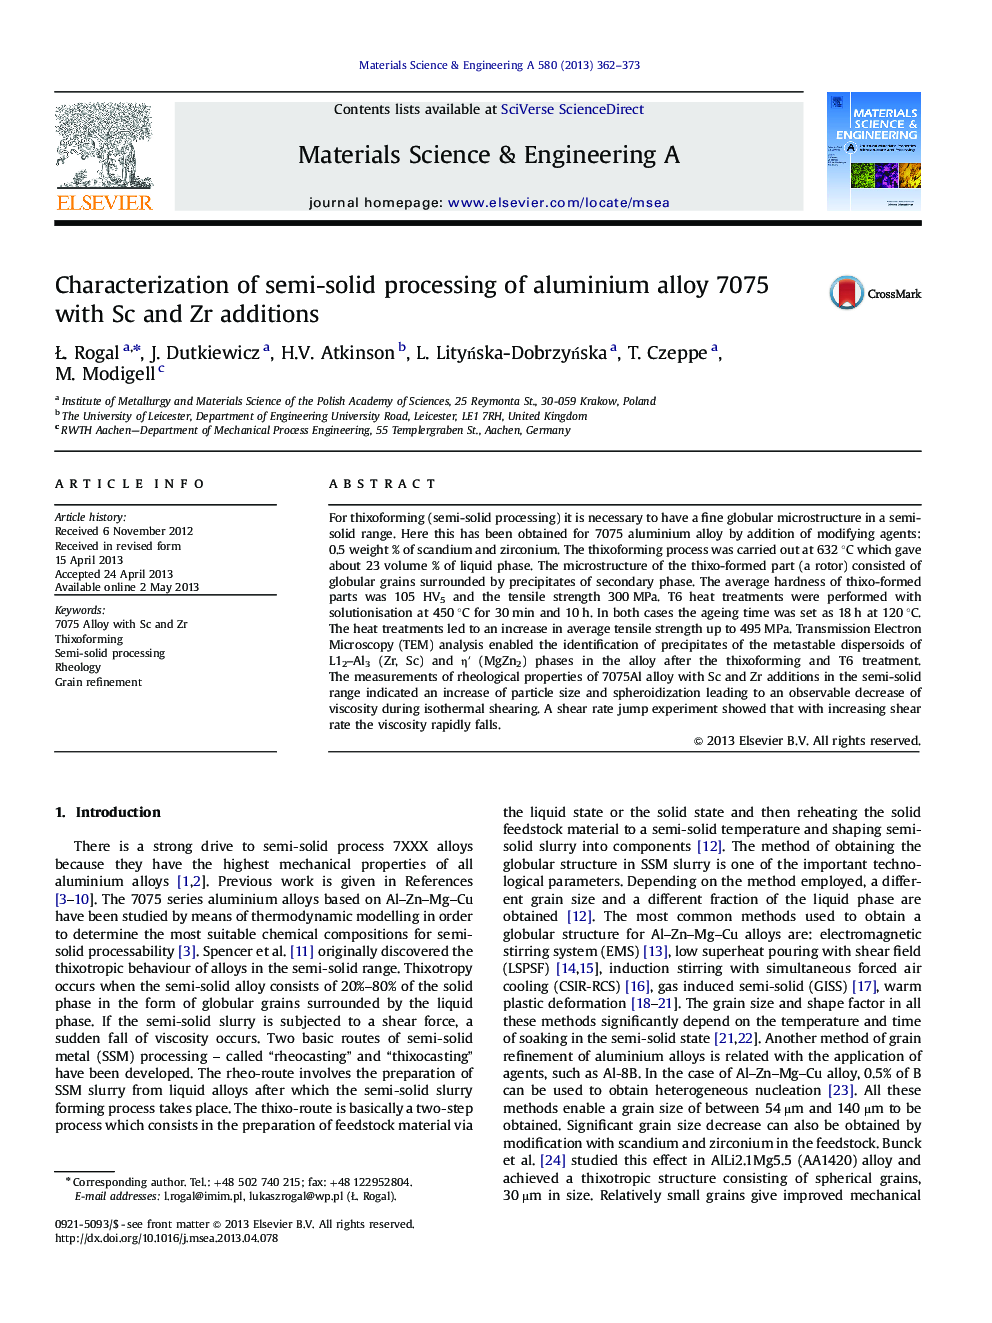 Characterization of semi-solid processing of aluminium alloy 7075 with Sc and Zr additions